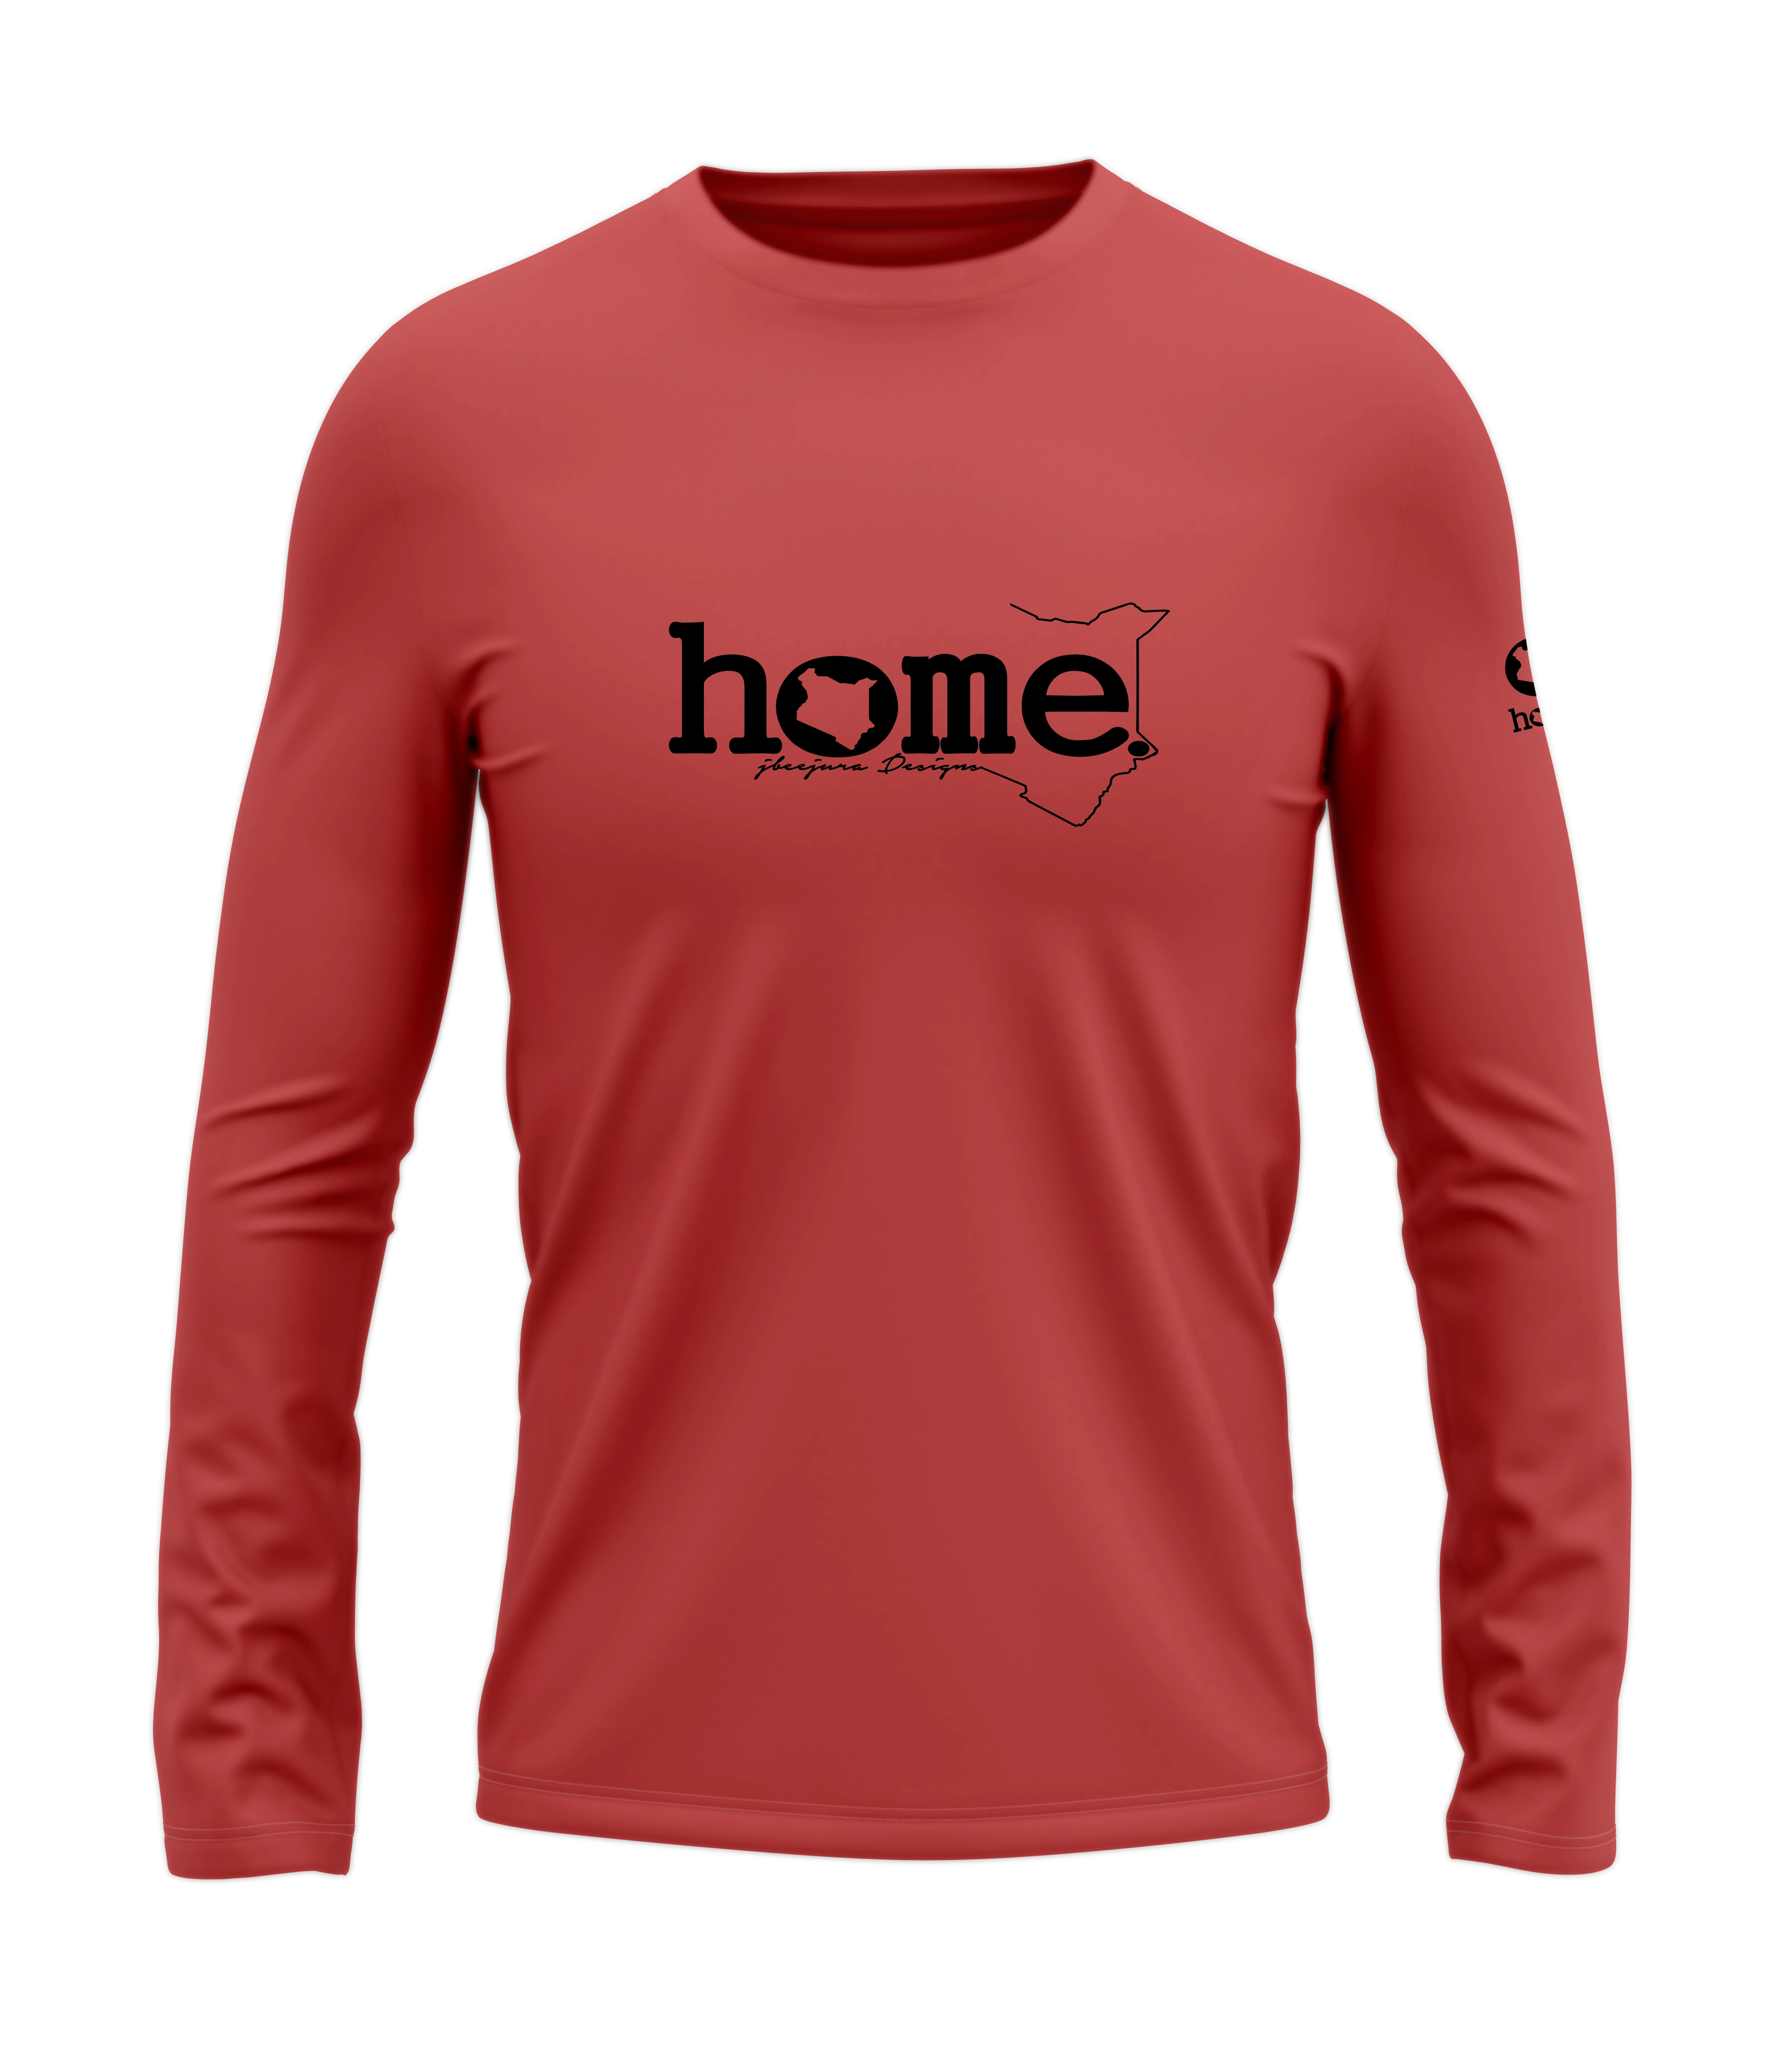 home_254 LONG-SLEEVED MULBERRY T-SHIRT WITH A BLACK CLASSIC WORDS PRINT – COTTON PLUS FABRIC